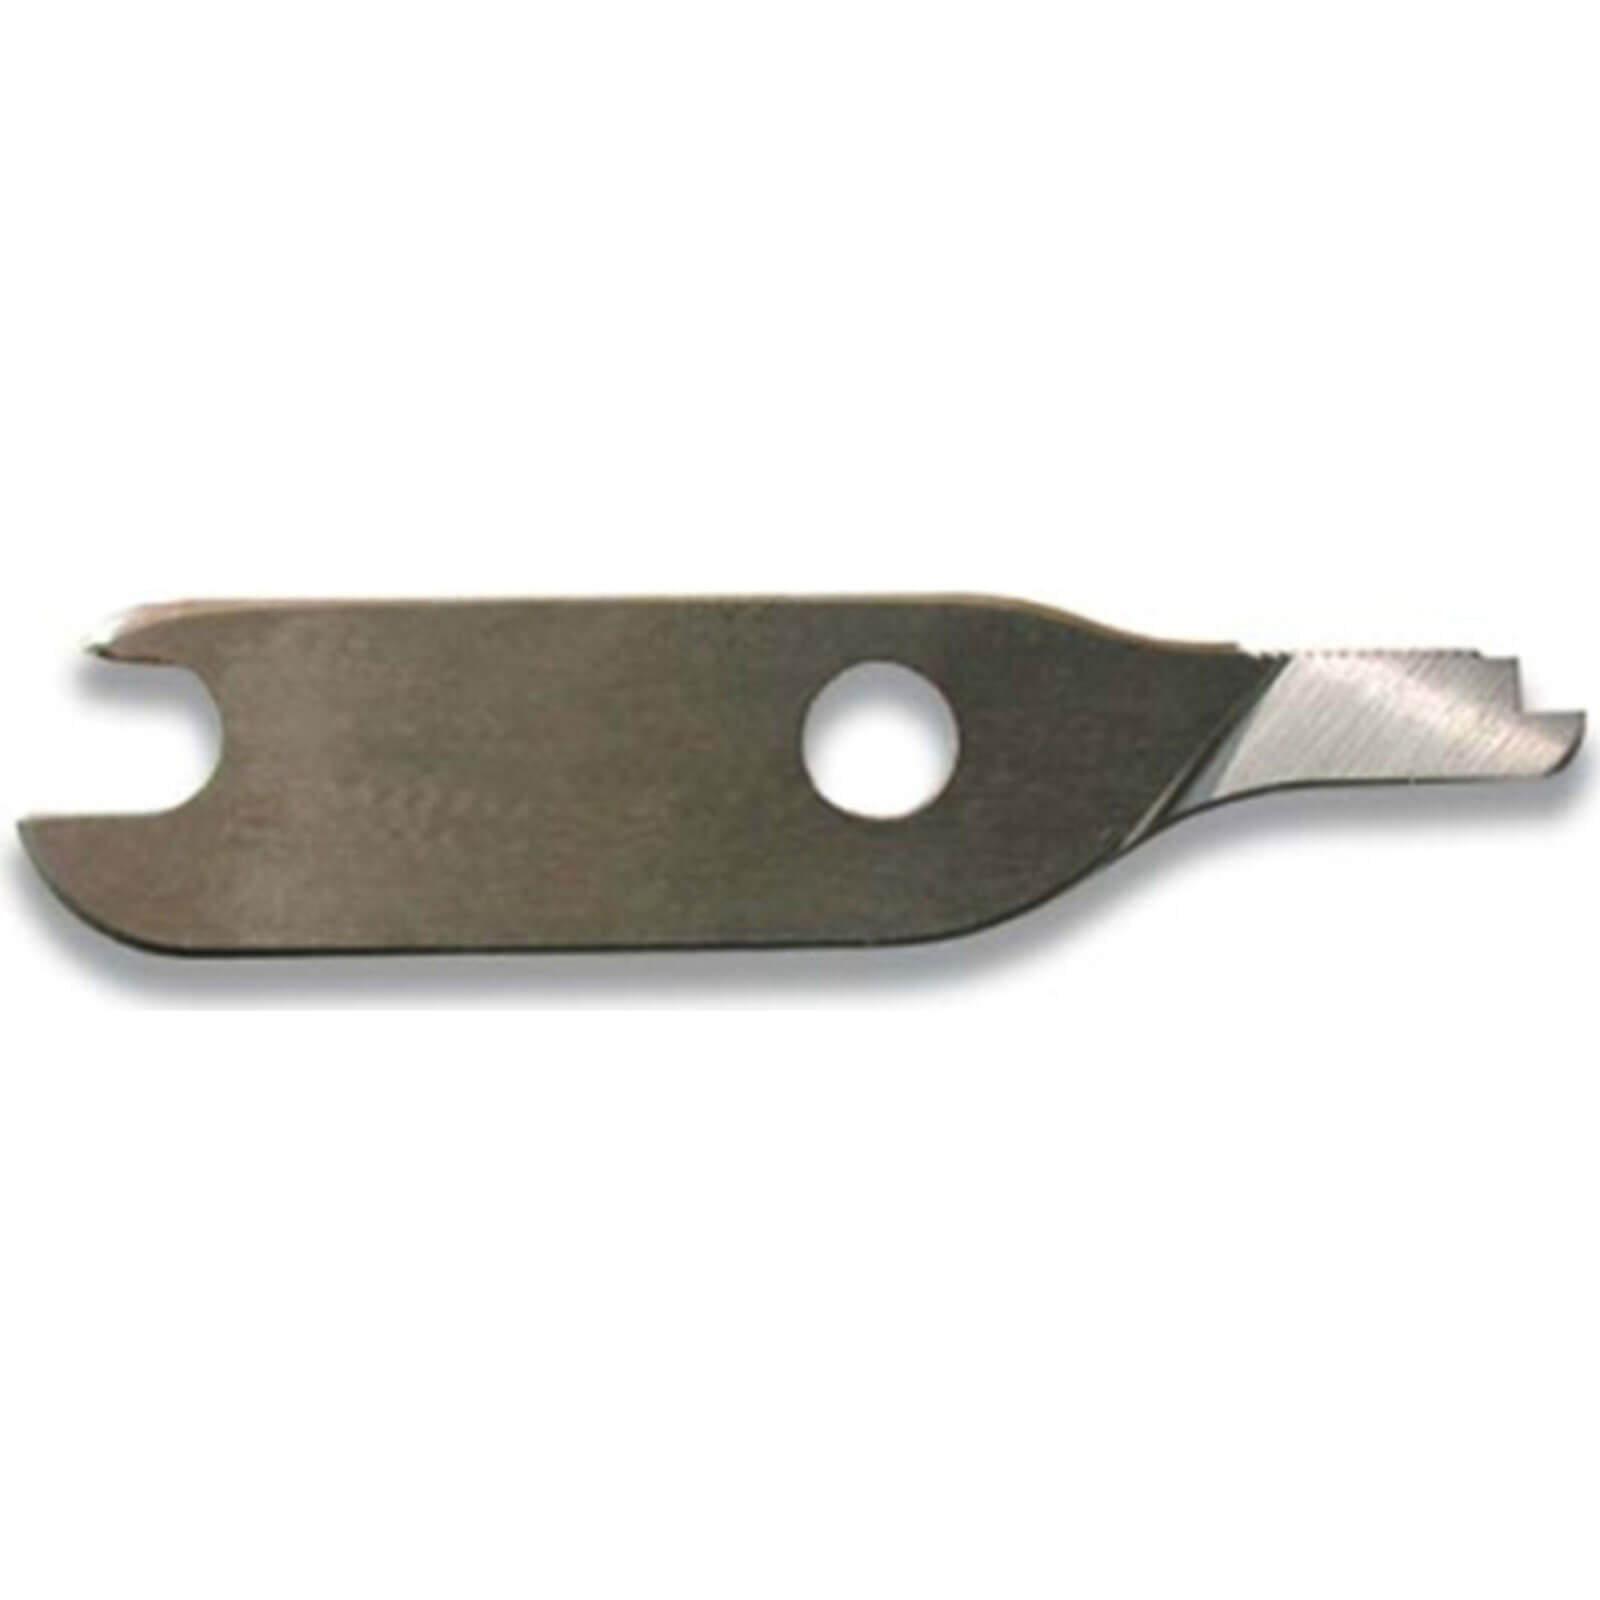 Image of Edma Major Blade for 0101 and 0110 Shears